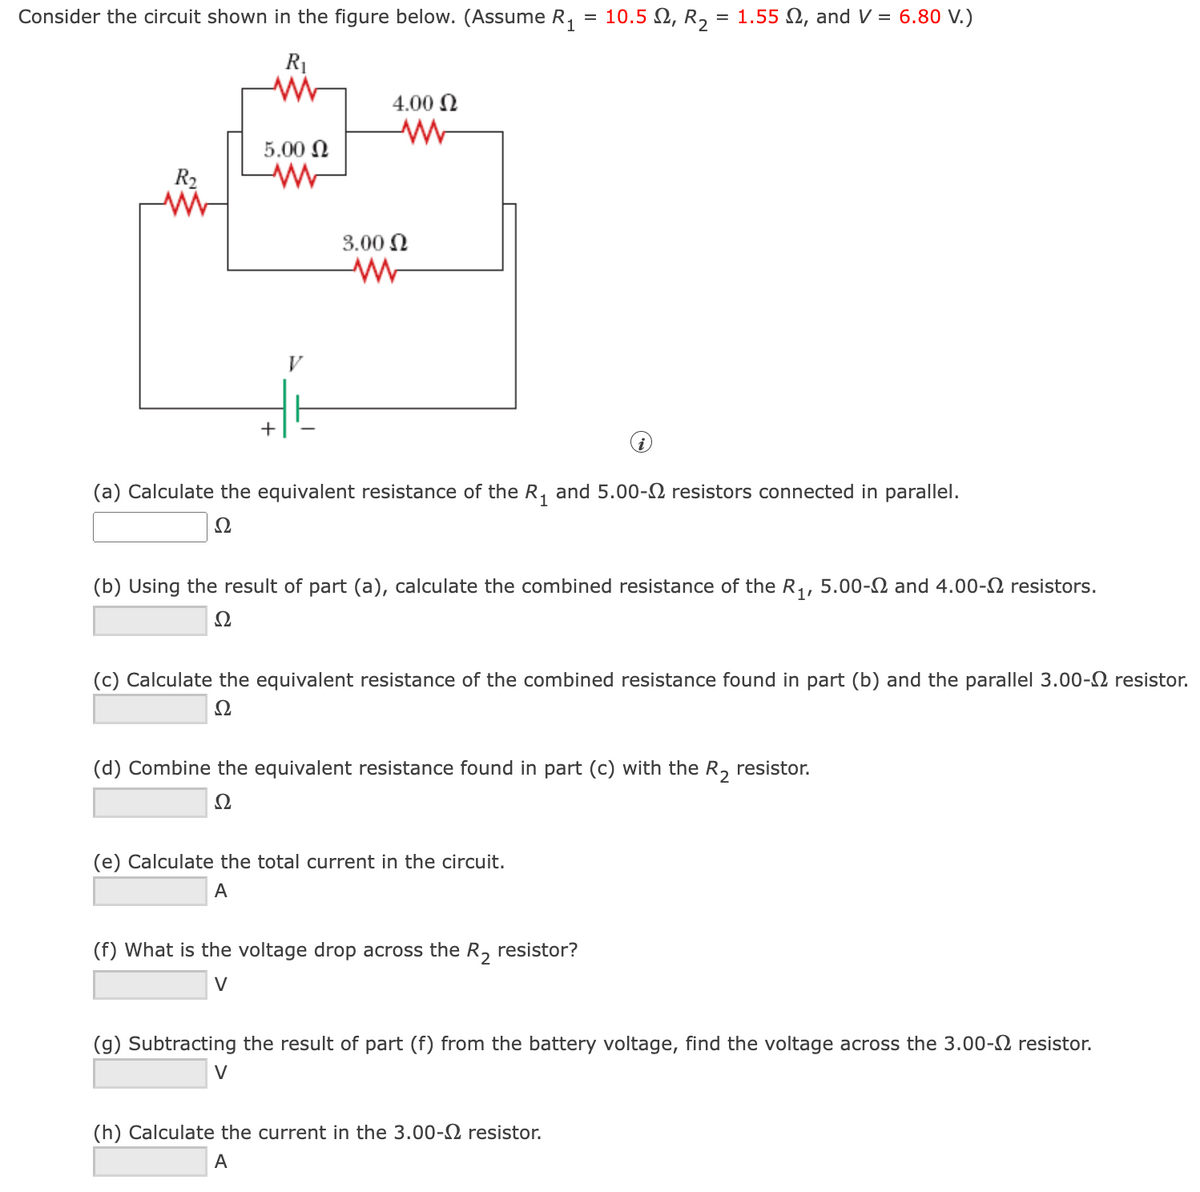 Consider the circuit shown in the figure below. (Assume R,
10.5 N, R2
= 1.55 N, and V = 6.80 V.)
R1
4.00 N
5.00 N
R2
3.00 N
V
+
(a) Calculate the equivalent resistance of the R, and 5.00-N resistors connected in parallel.
Ω
(b) Using the result of part (a), calculate the combined resistance of the R,, 5.00-2 and 4.00-2 resistors.
Ω
(c) Calculate the equivalent resistance of the combined resistance found in part (b) and the parallel 3.00-2 resistor.
Ω
(d) Combine the equivalent resistance found in part (c) with the R, resistor.
Ω
(e) Calculate the total current in the circuit.
A
(f) What is the voltage drop across the R, resistor?
V
(g) Subtracting the result of part (f) from the battery voltage, find the voltage across the 3.00-2 resistor.
V
(h) Calculate the current in the 3.00-2 resistor.
A
